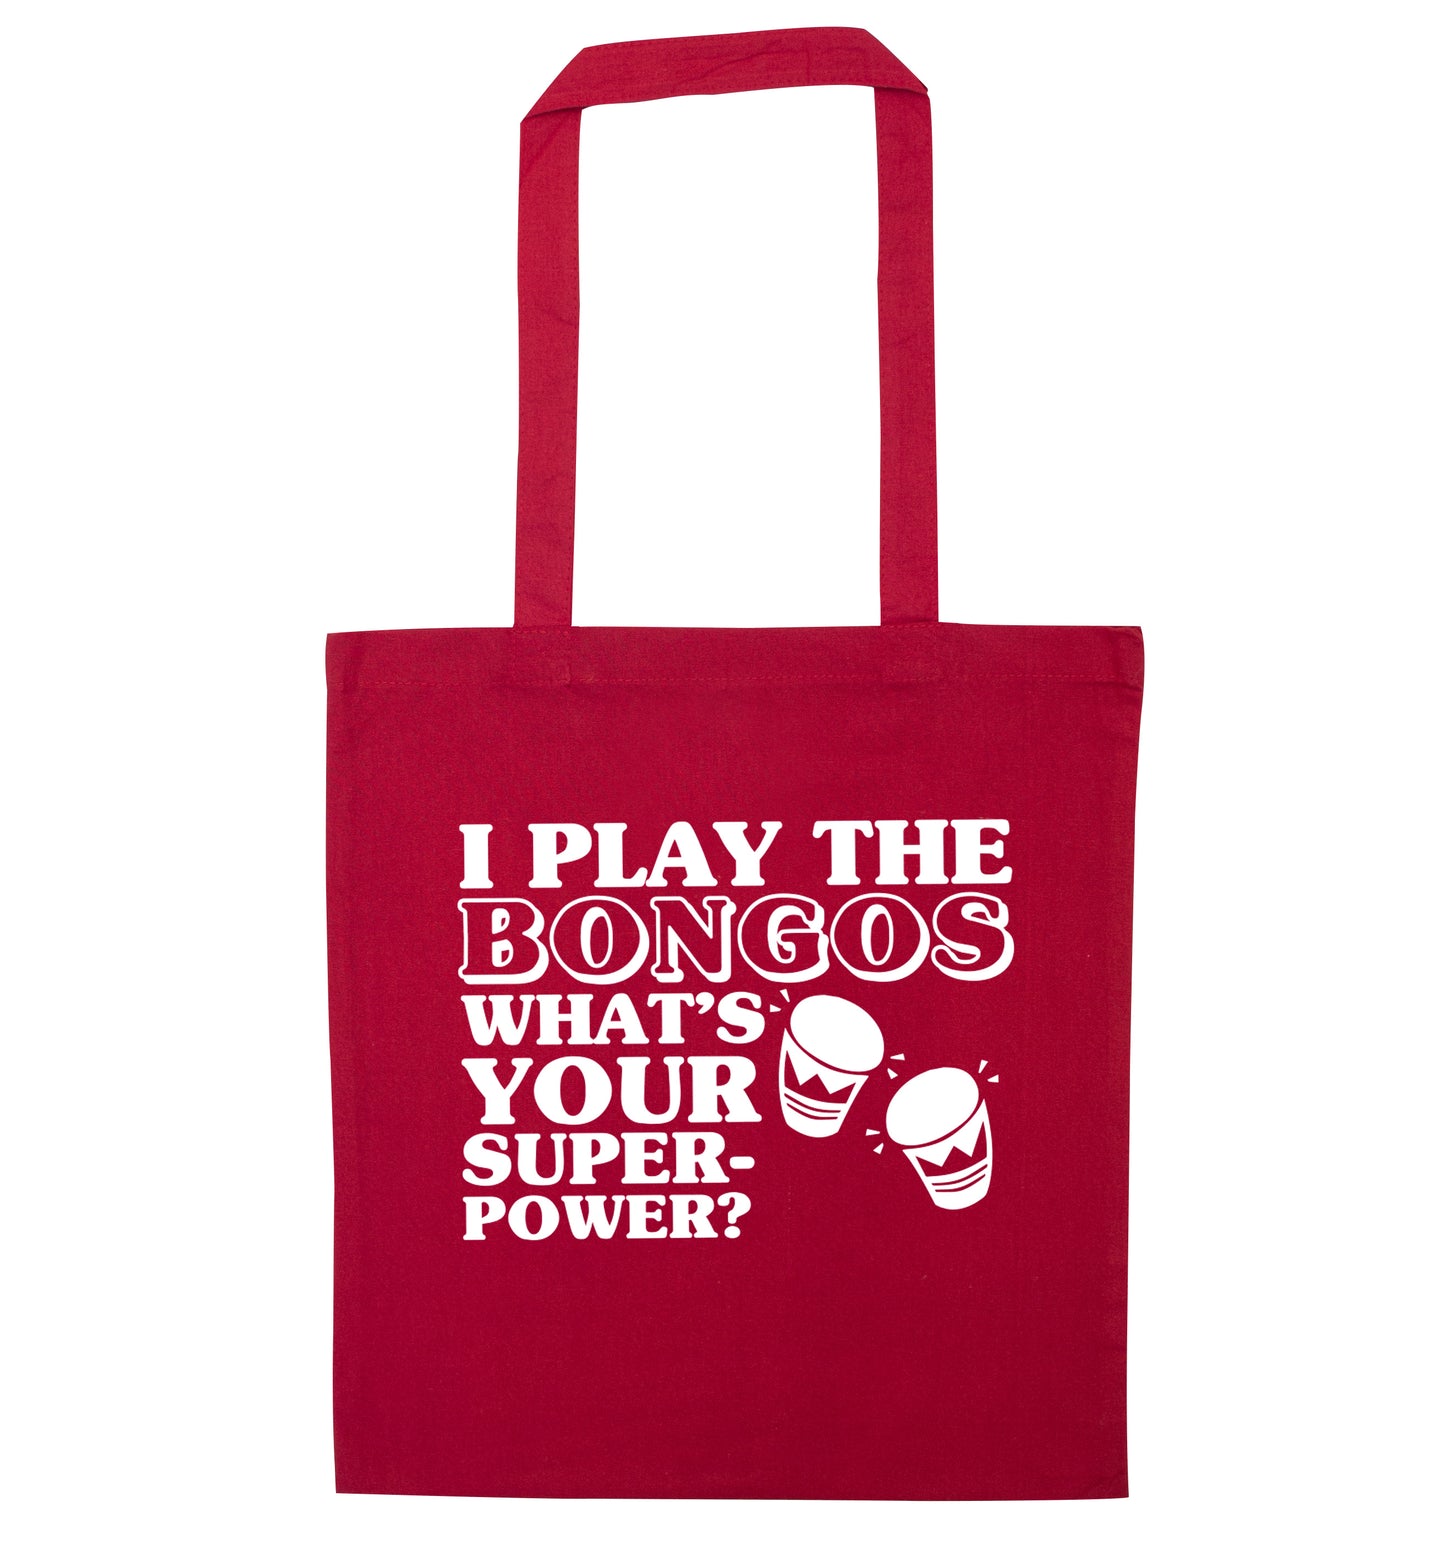 I play the bongos what's your superpower? red tote bag